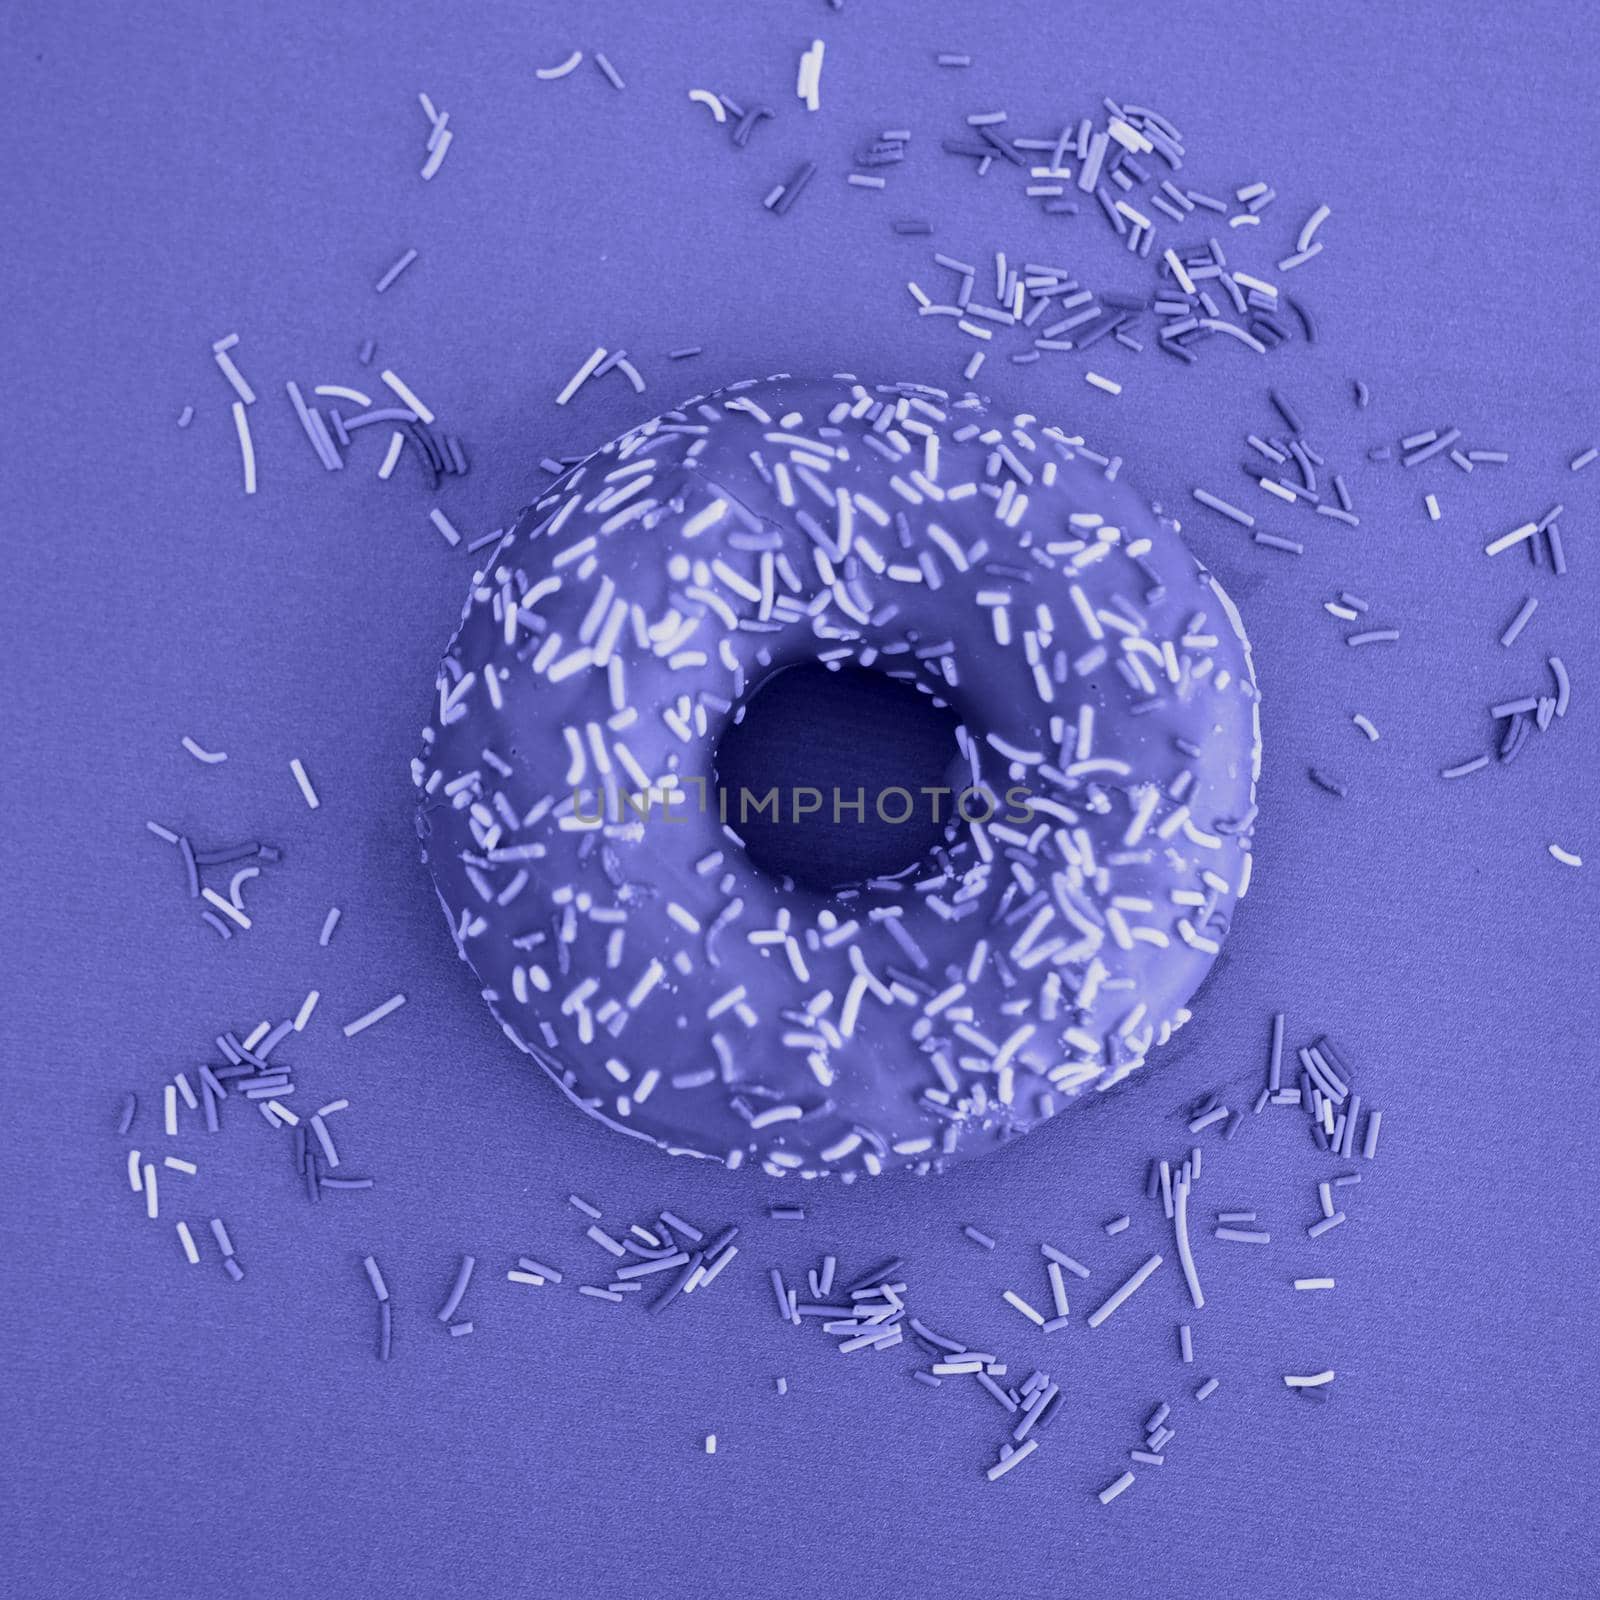 Violet doughnuts. National donut day. Minimalism. Demonstrating the colors of 2022 - Very Peri by Annu1tochka